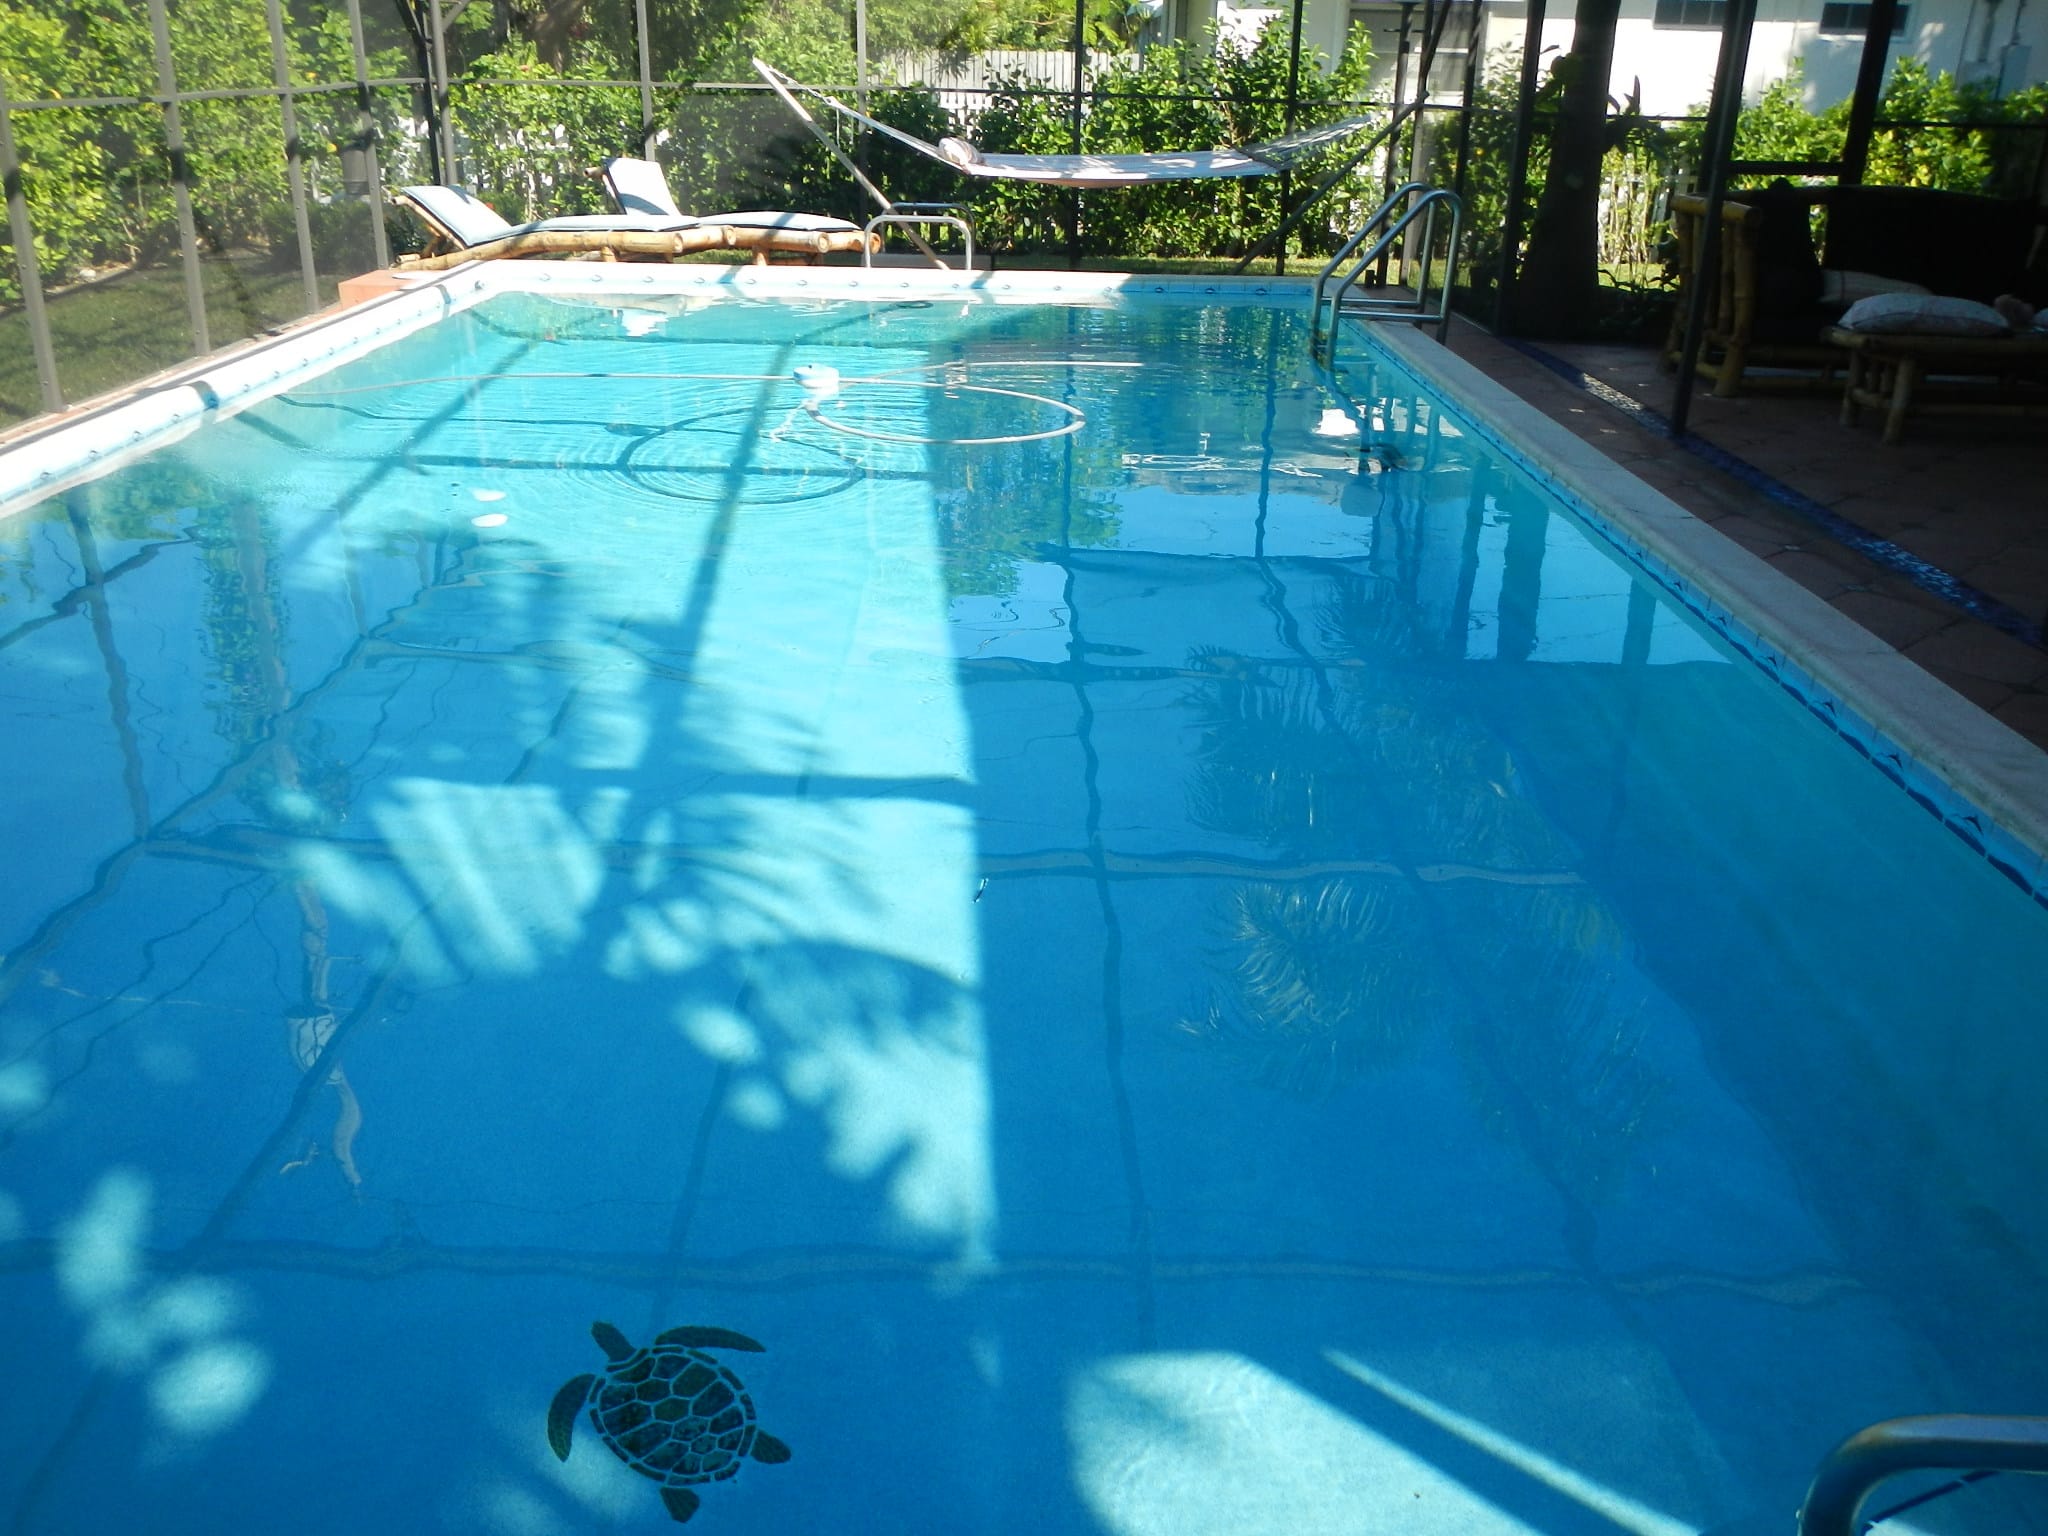 Pool and Spa Inspection in Miami, FL